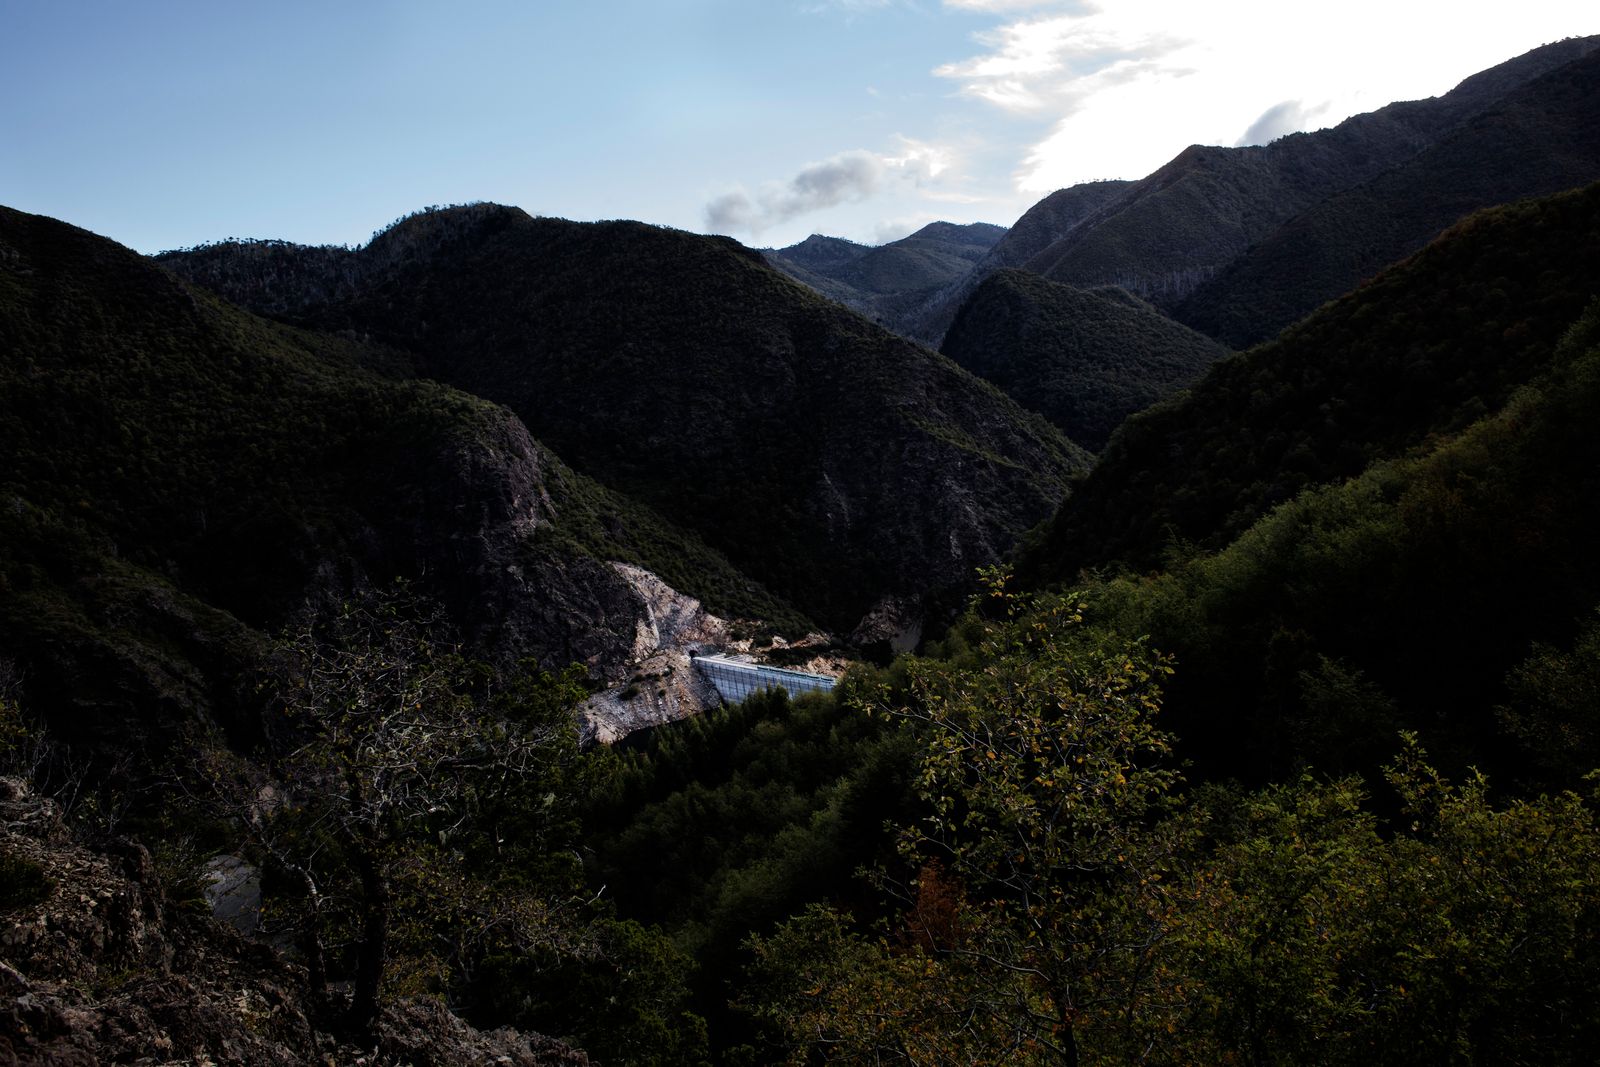 The Impact of Hydroelectricity in Chilean Patagonia